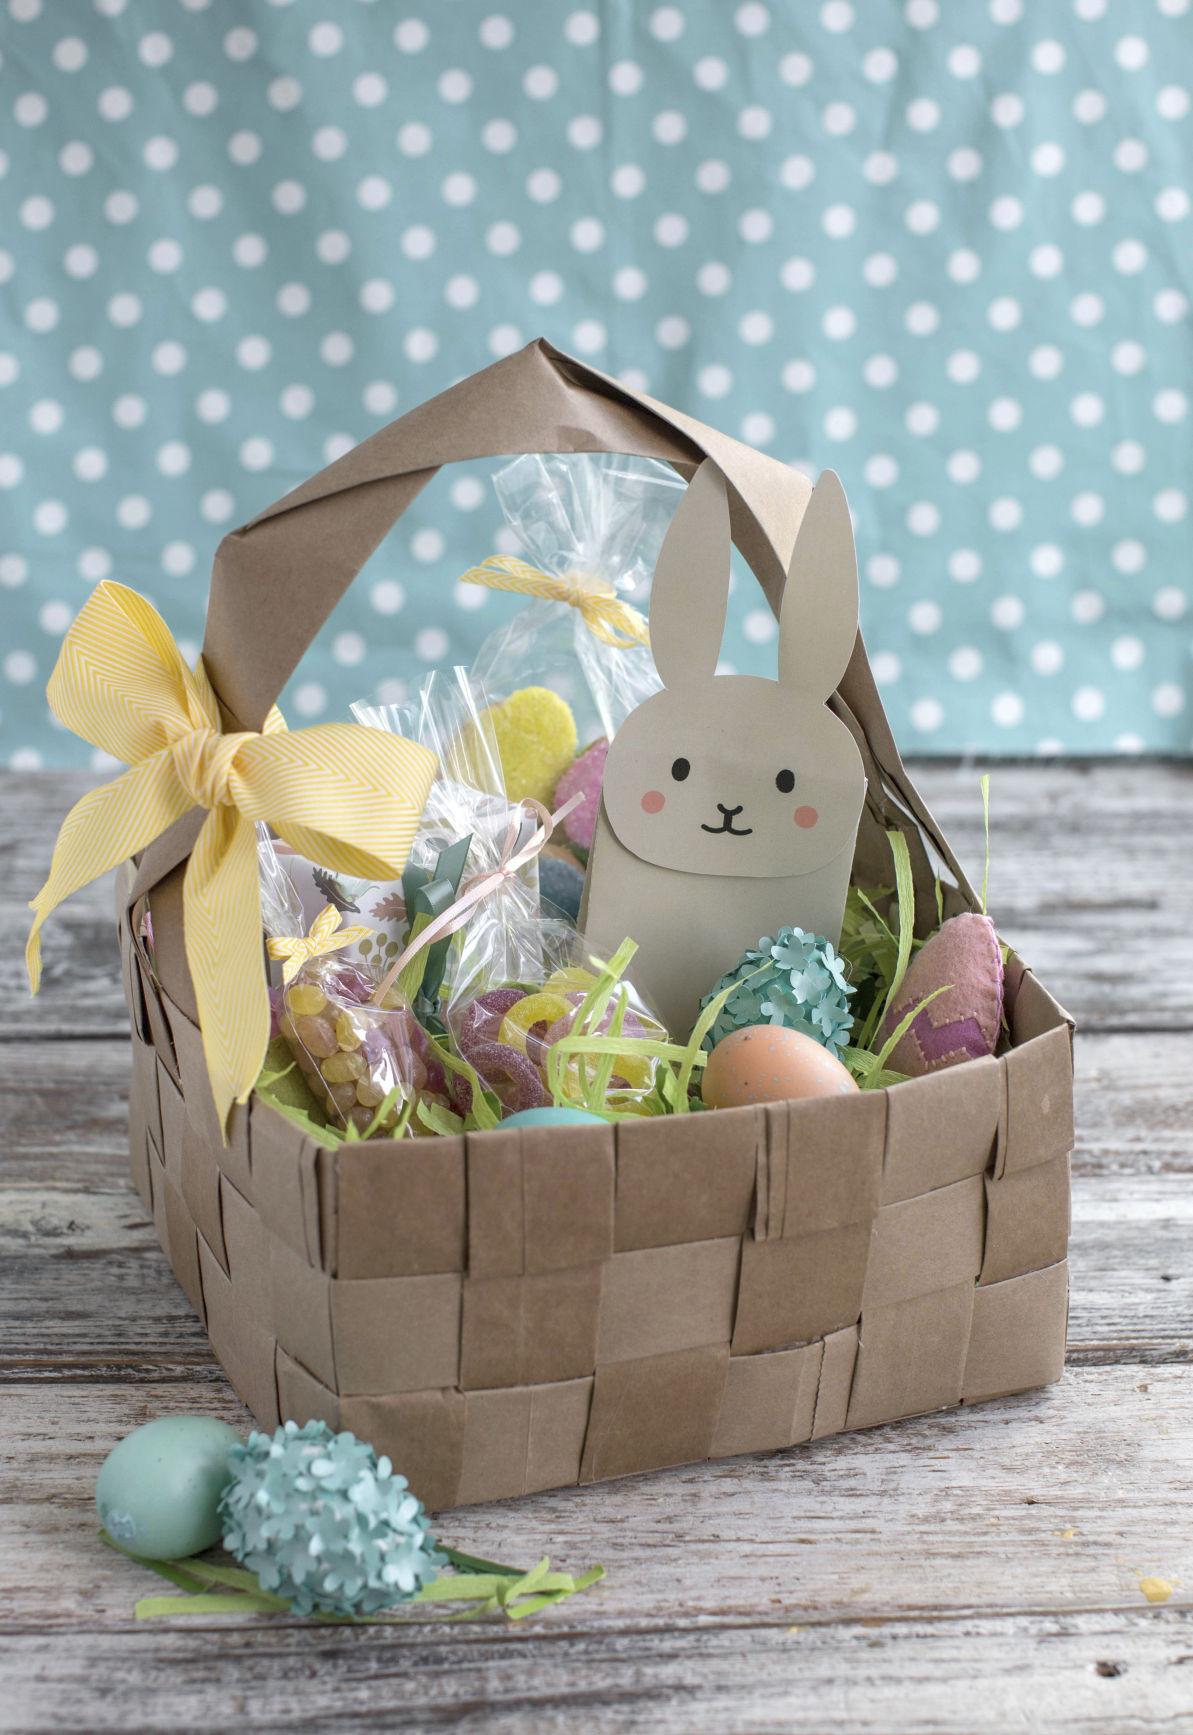 Hop to it 5 ways to get creative with Easter baskets